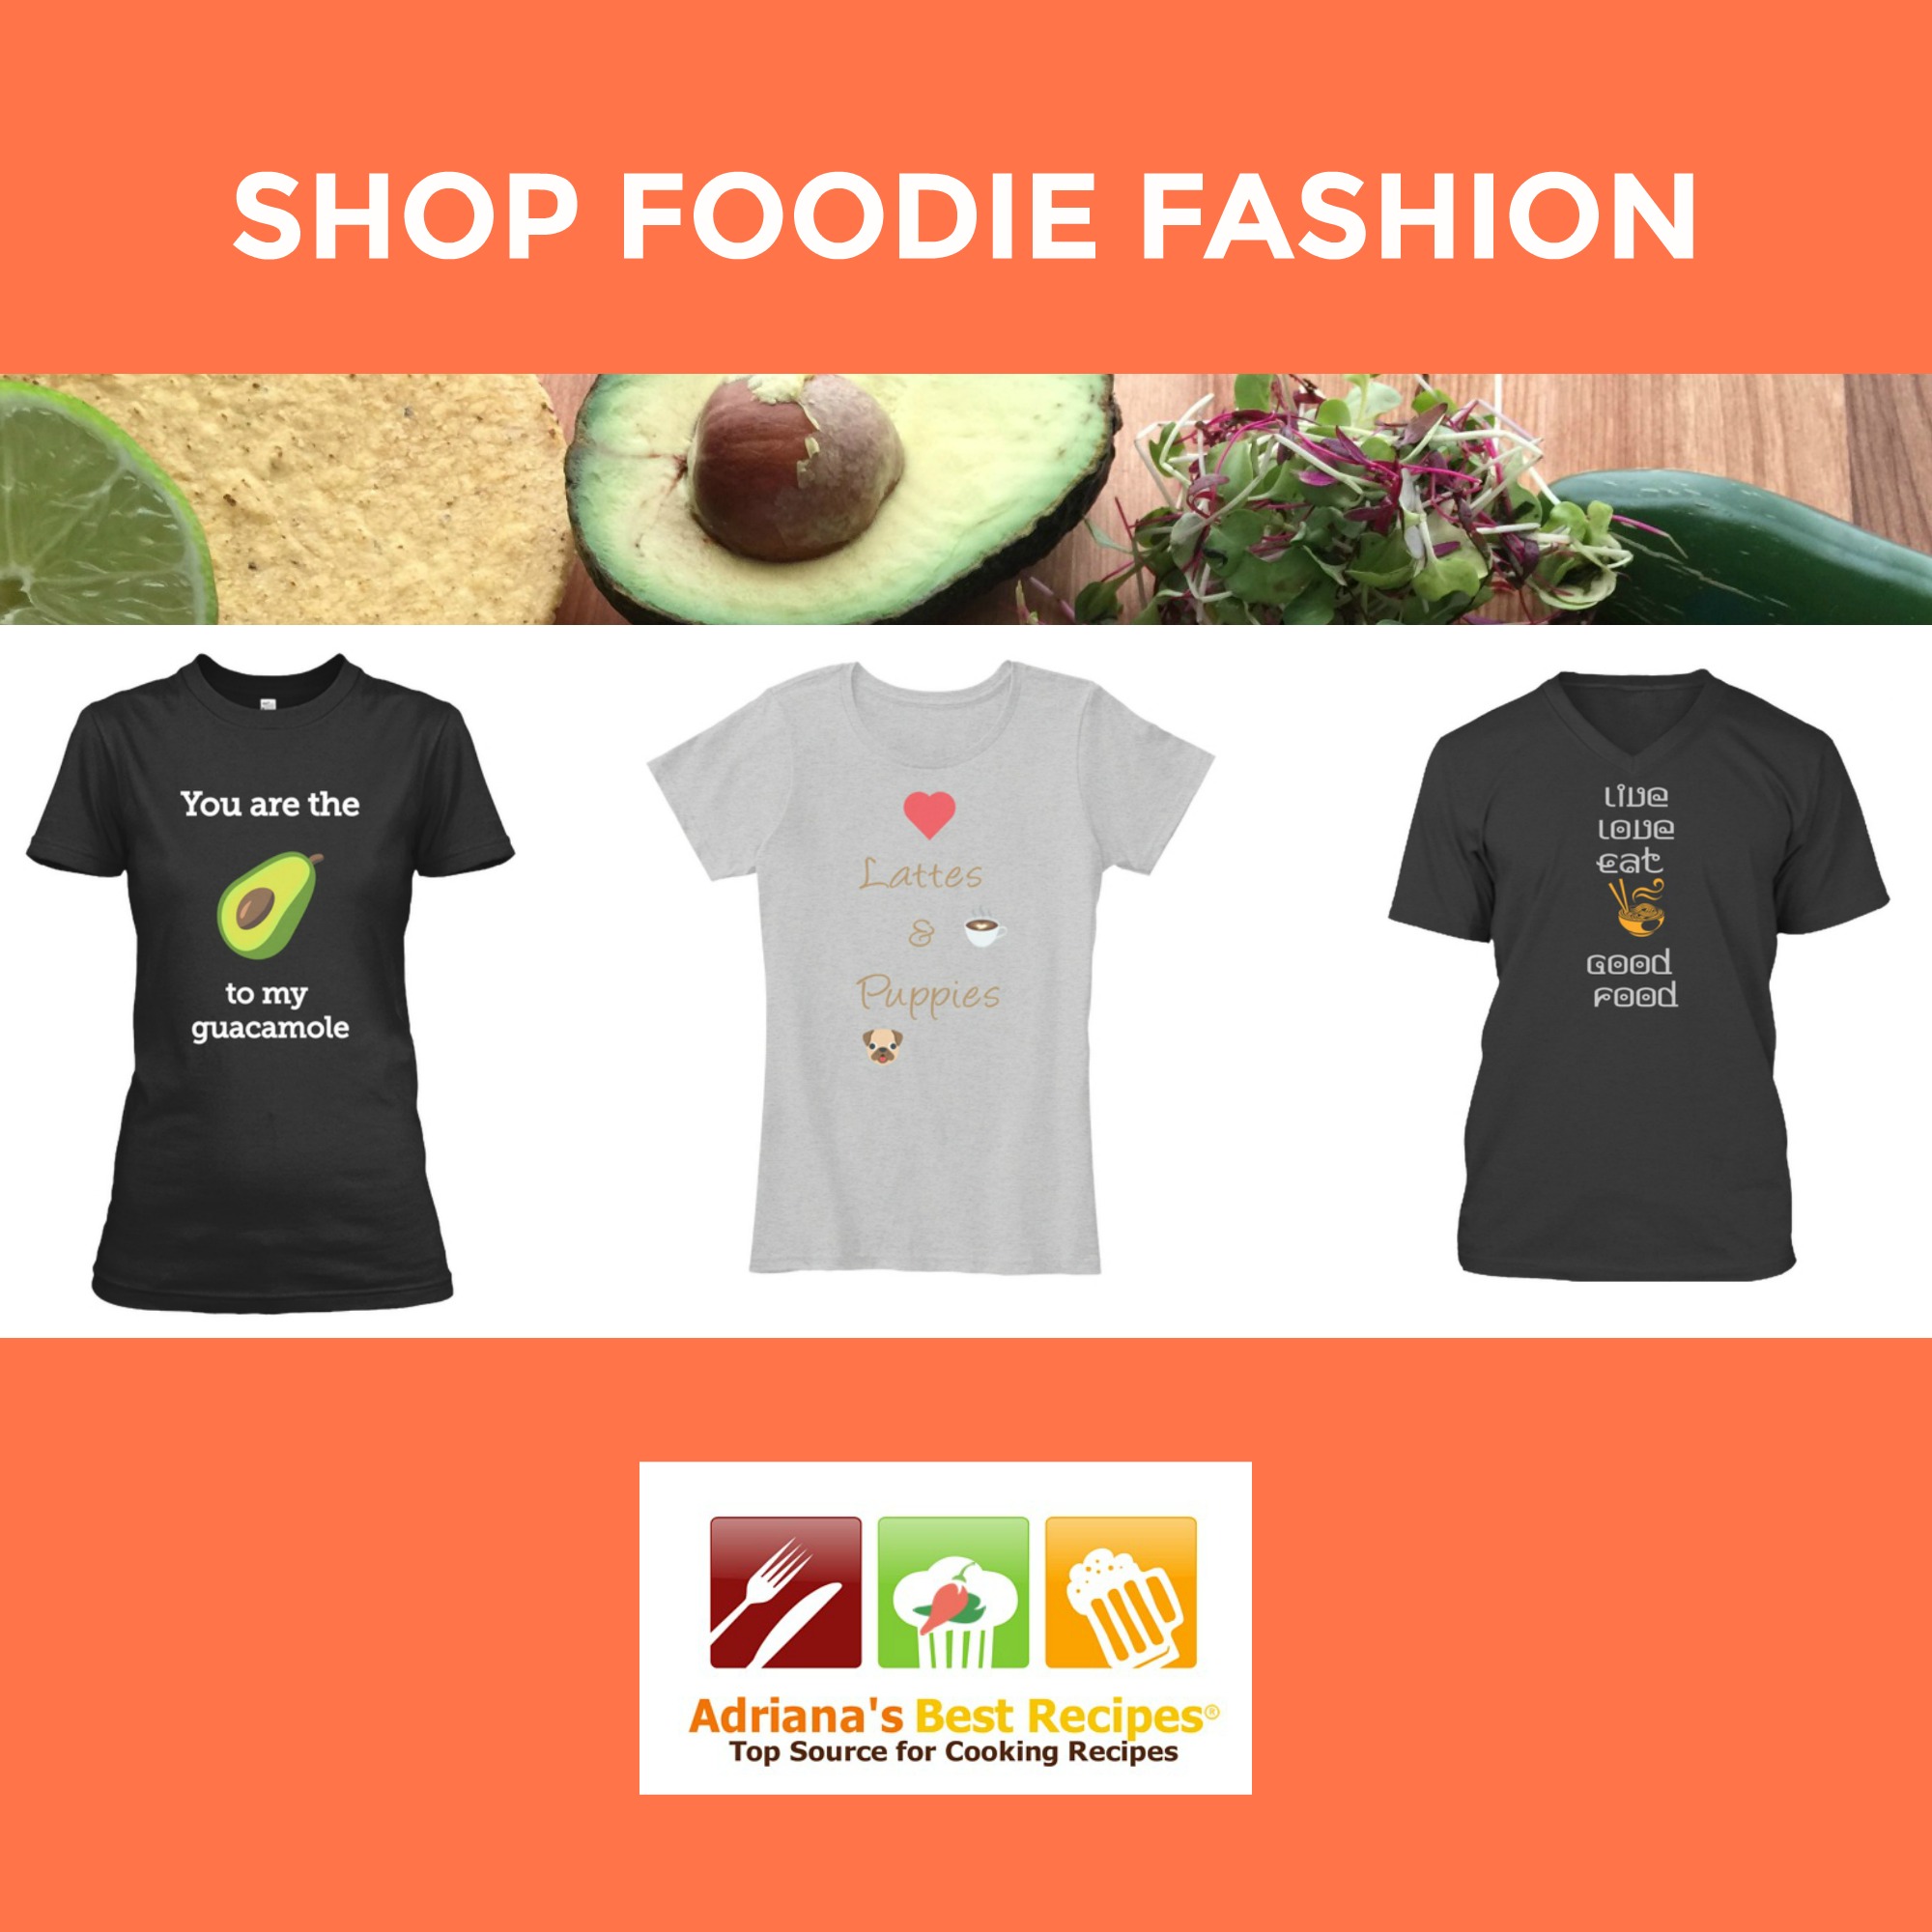 Shop Foodie Fashion at Adriana's Best Recipes